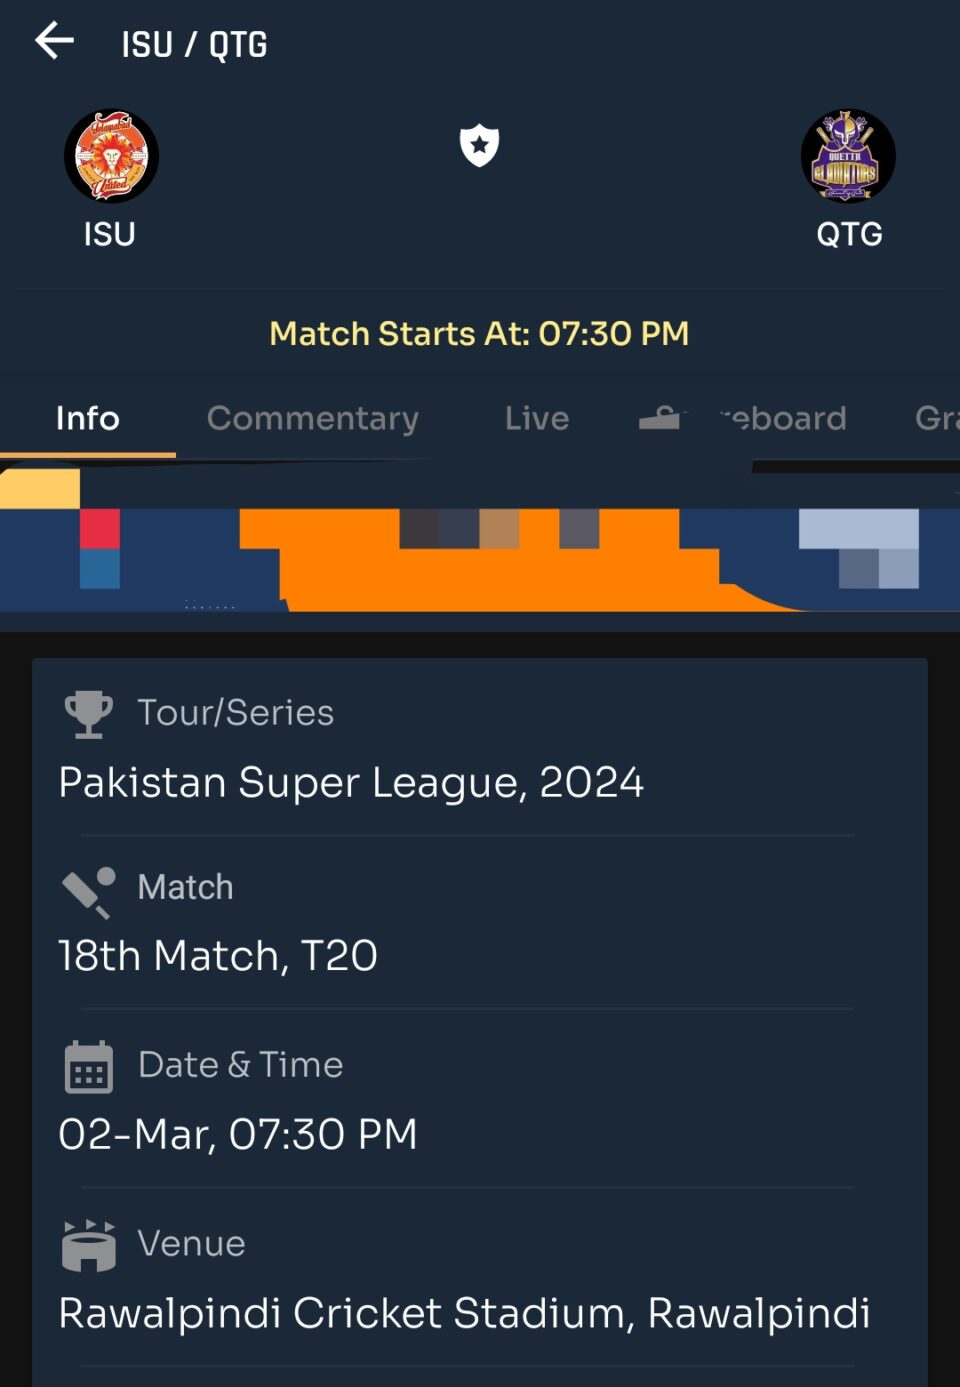 Today PSL Prediction |Match Number 18|QTG vs ISU| Toss and Match Analysis | Pitch & Weather Reports